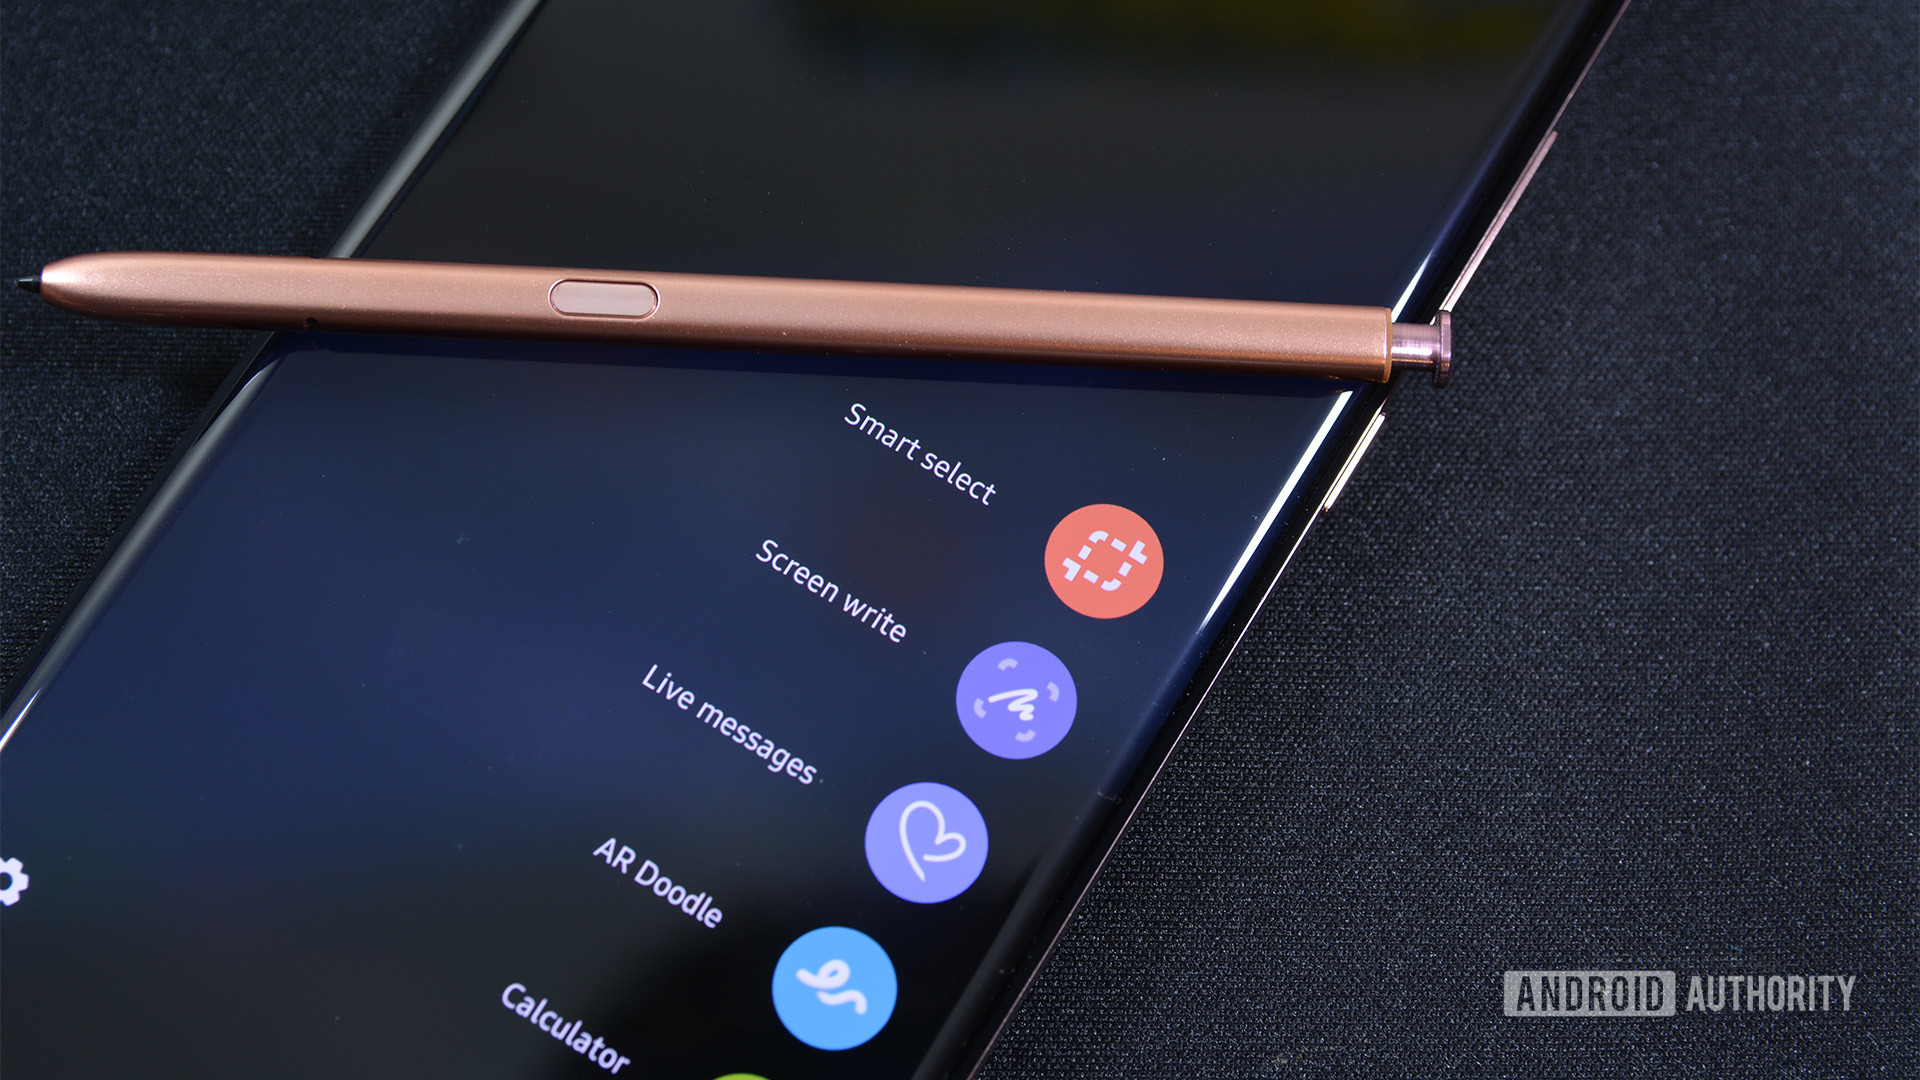 Samsung ditches Note, brings S Pen to flagship S series